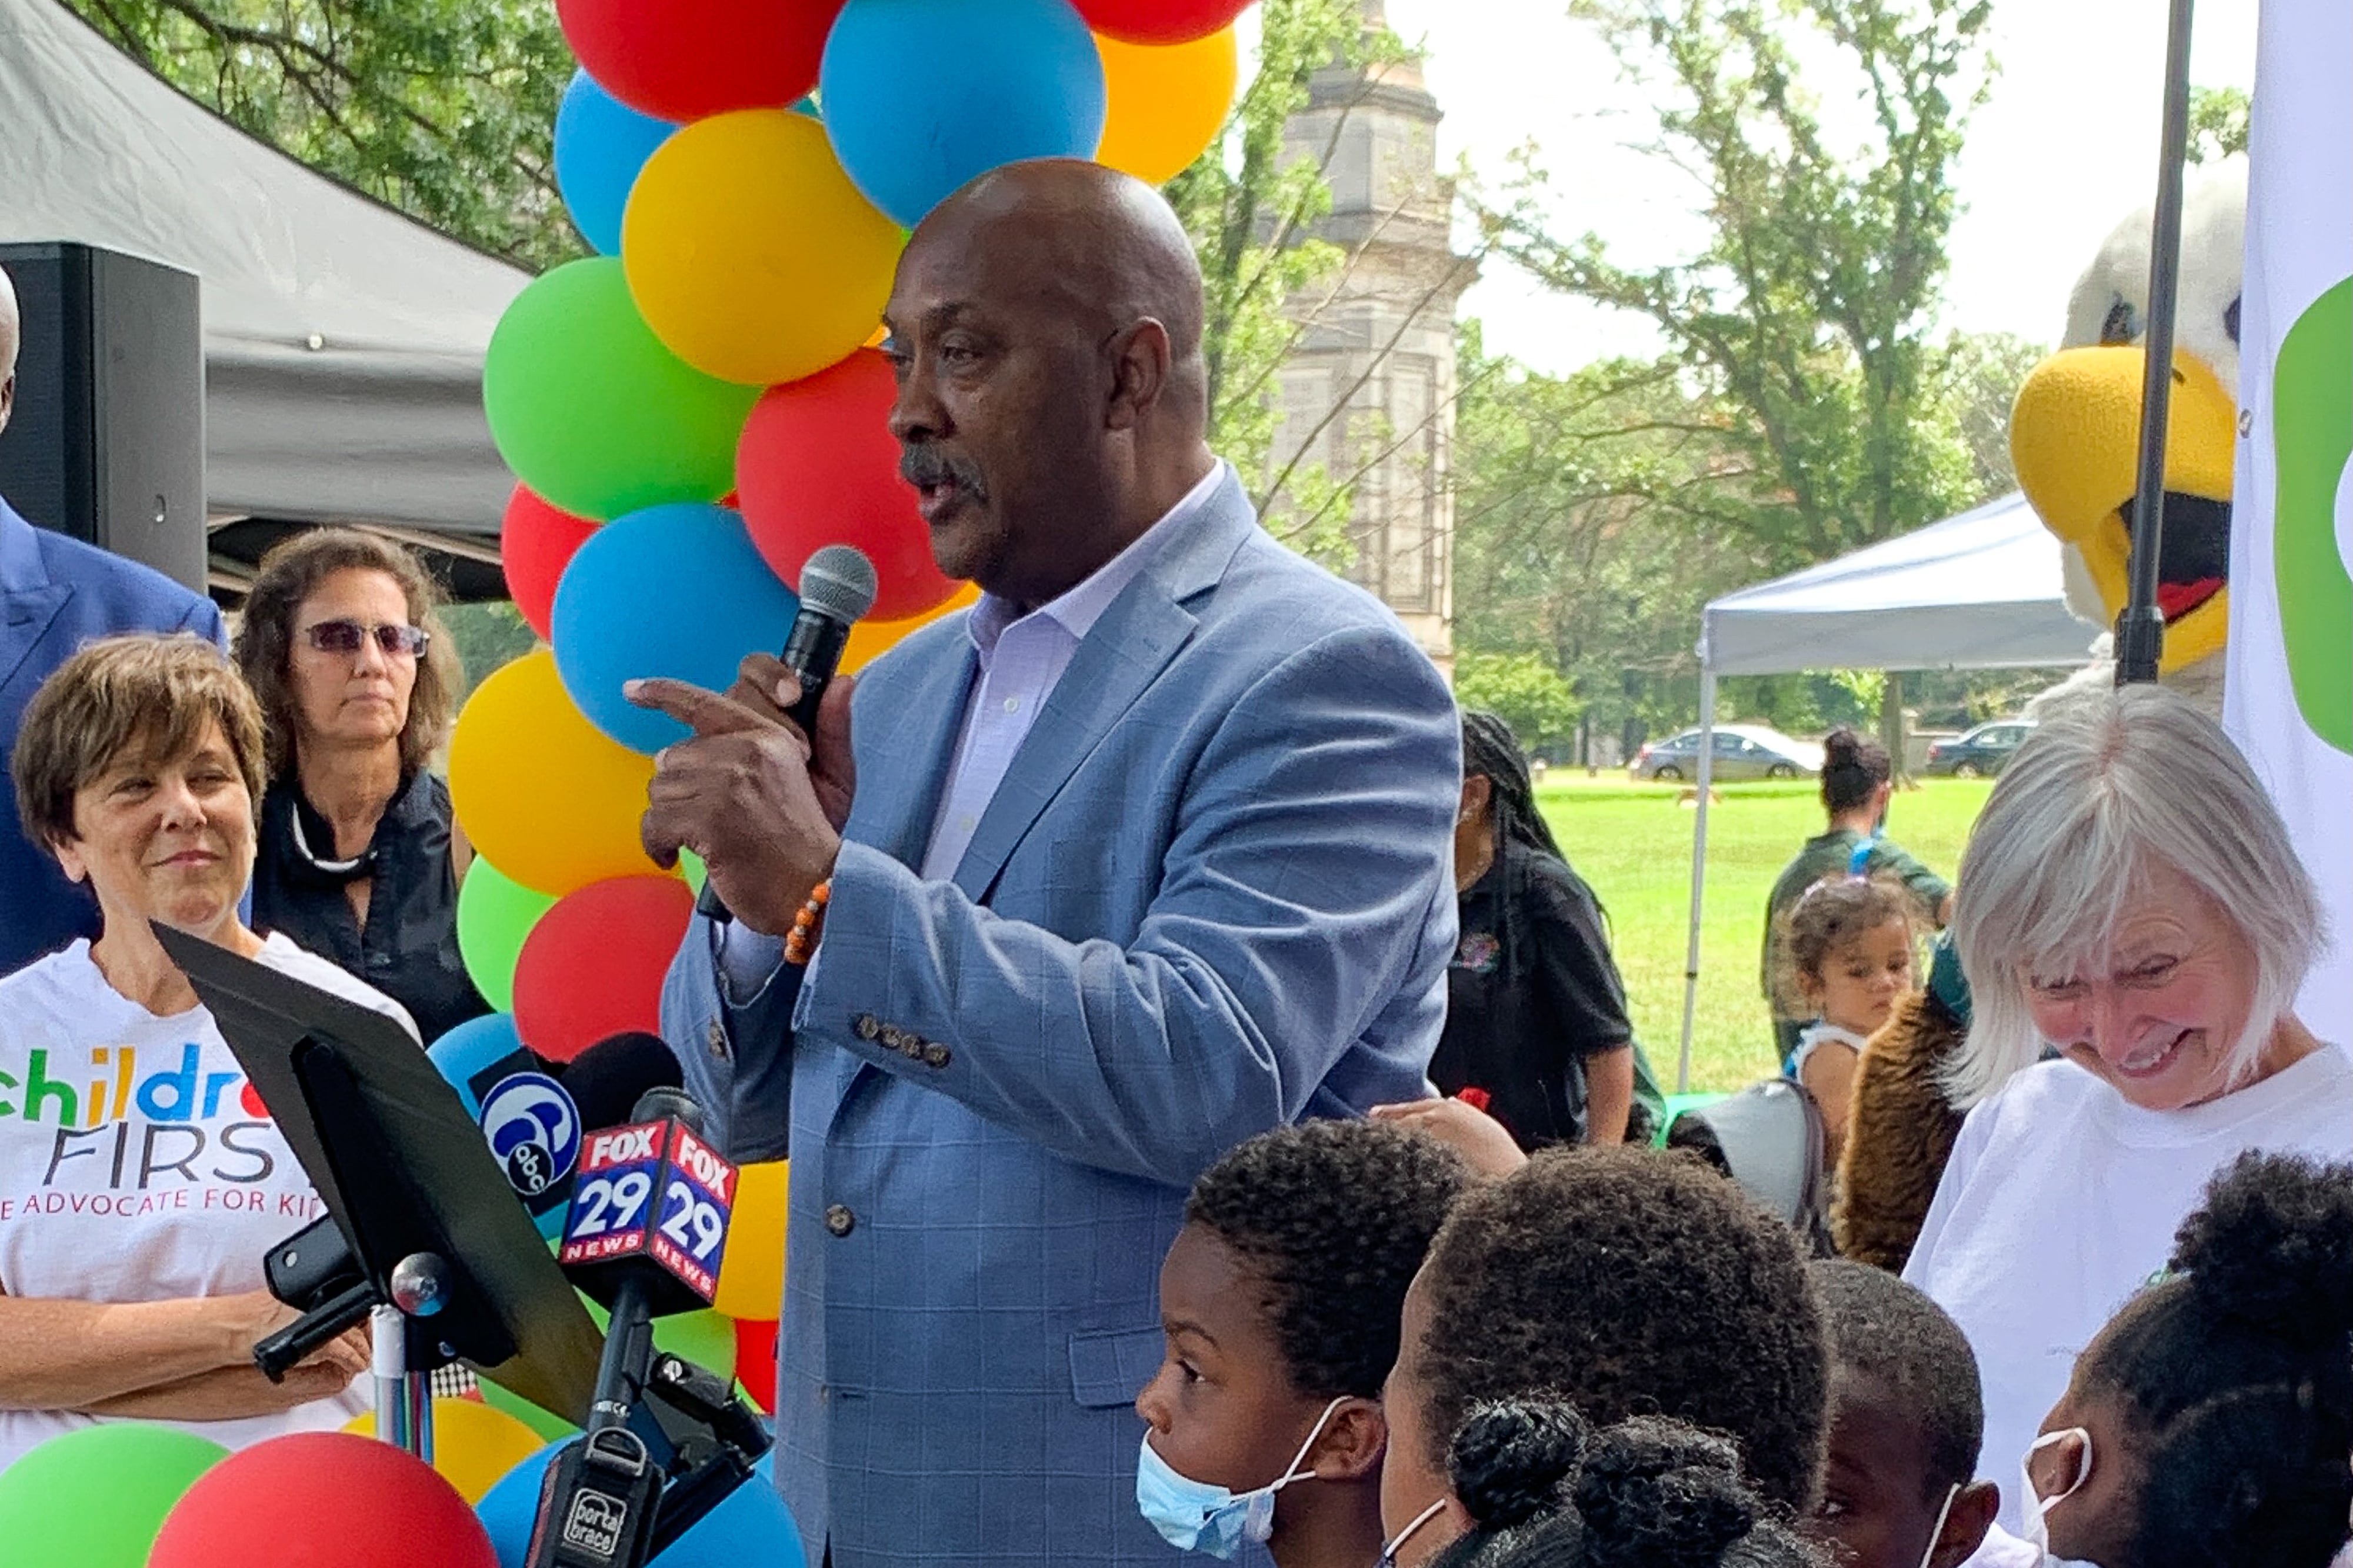 U.S. Rep. Dwight Evans speaks at Children First event Thursday. The organization’s executive director, Donna Cooper, is to his left wearing the Children First T-shirt, and there are several children and a few other adults around him.